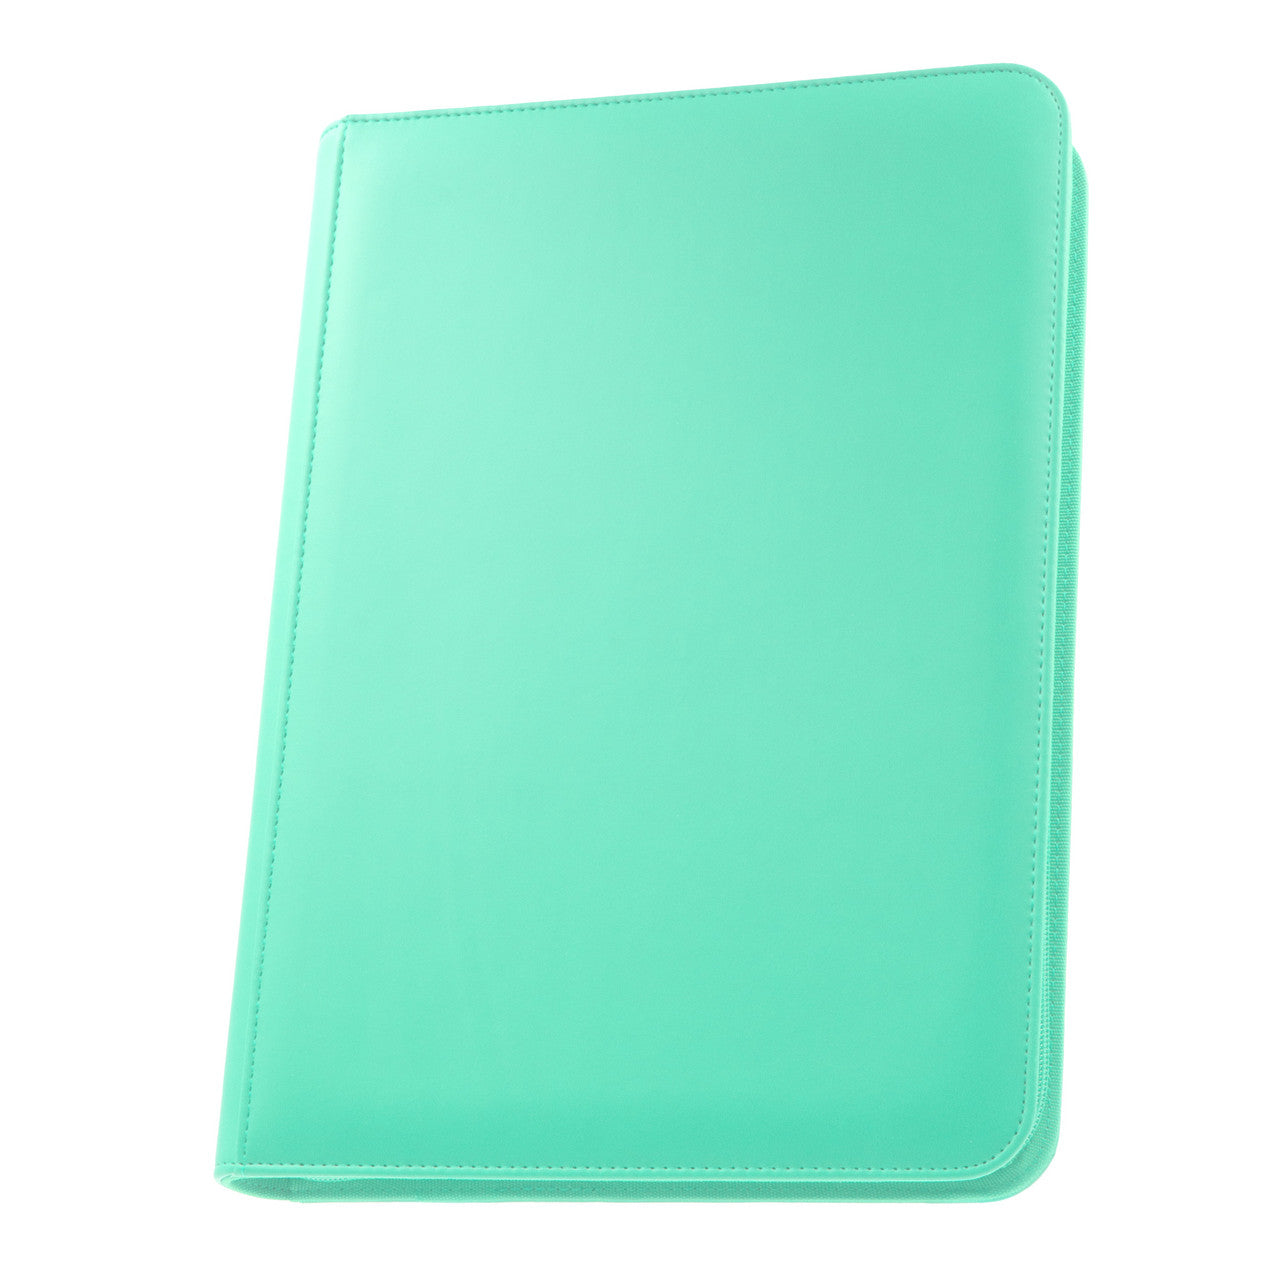 Palms Off Gaming STEALTH 9 Pocket Zip Trading Card Binder - Turquoise